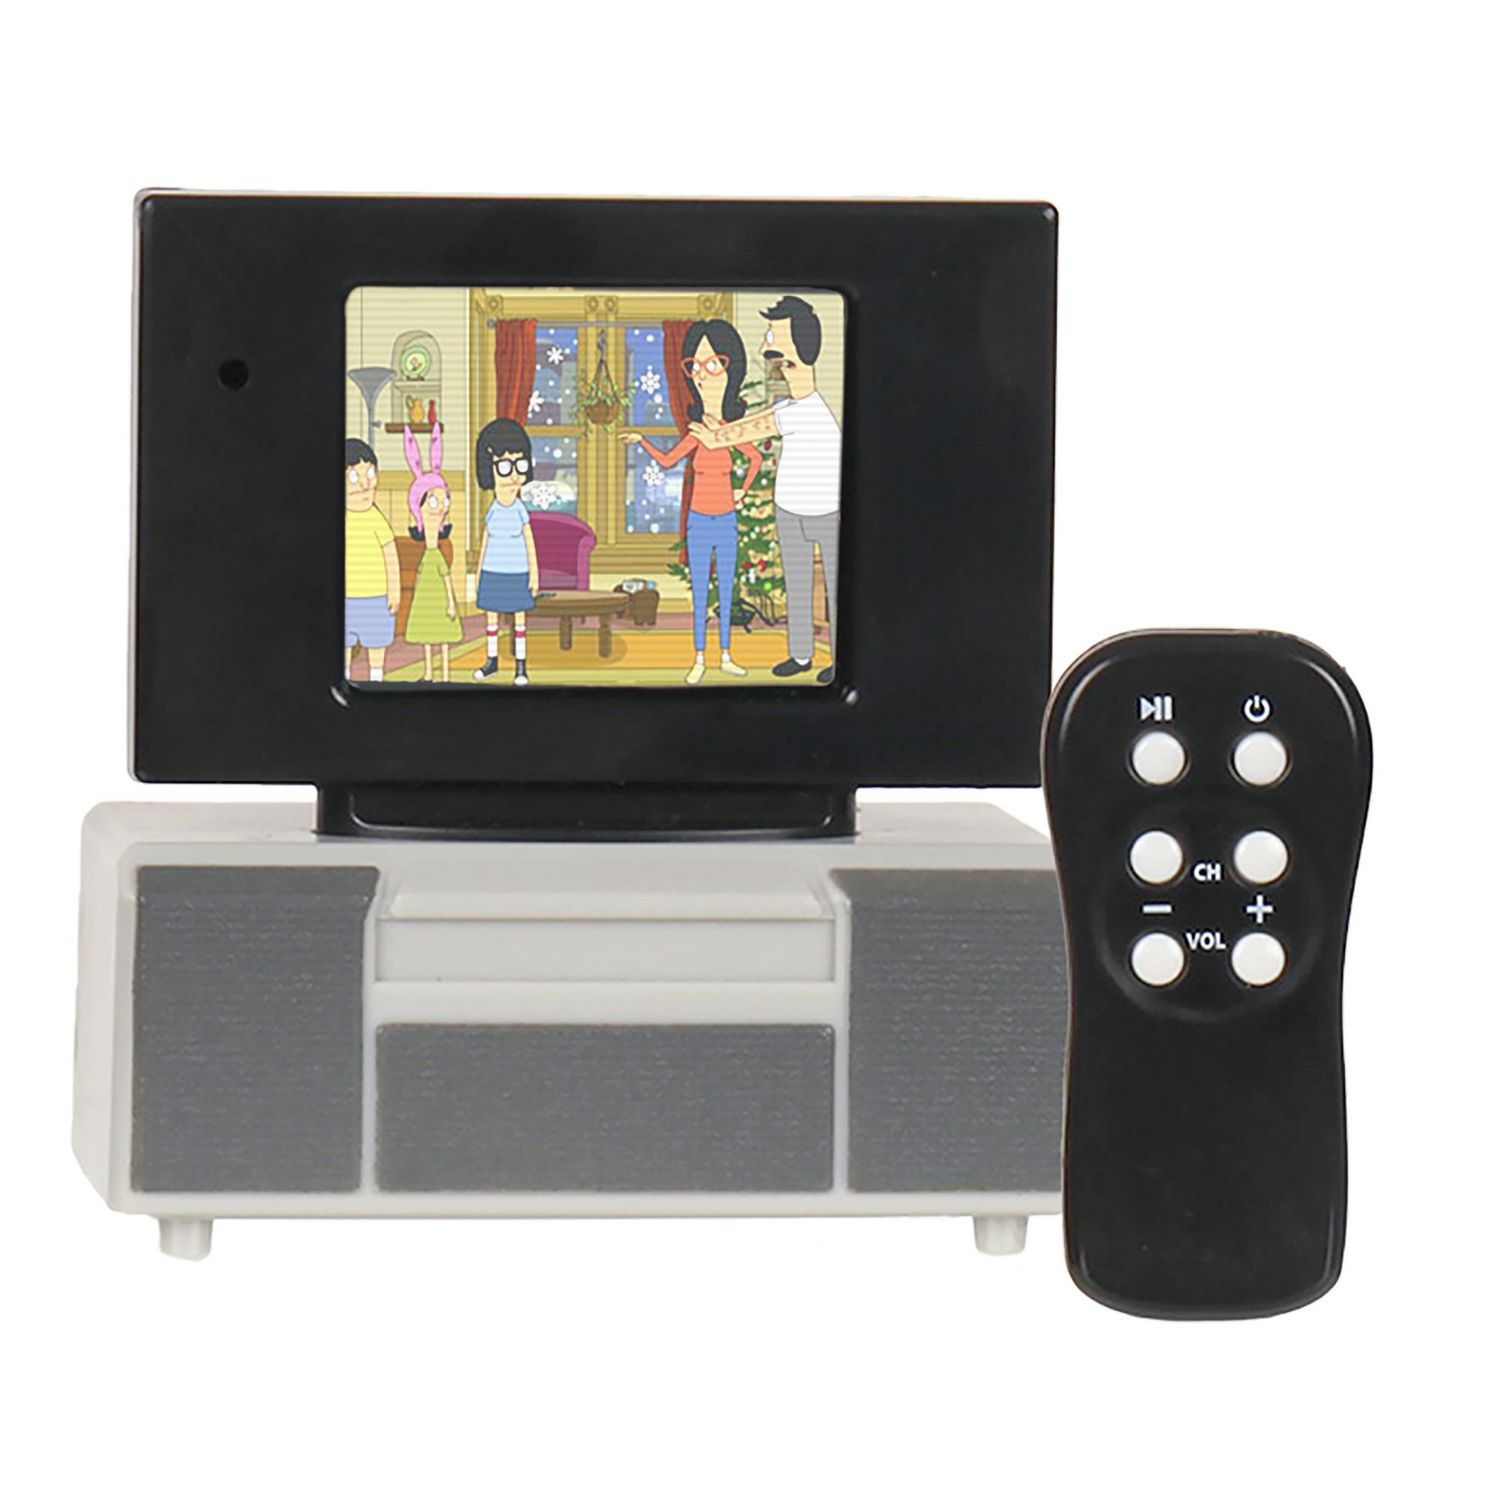 Tiny TV Classics - Bob's Burgers Edition- Newest Collectible from